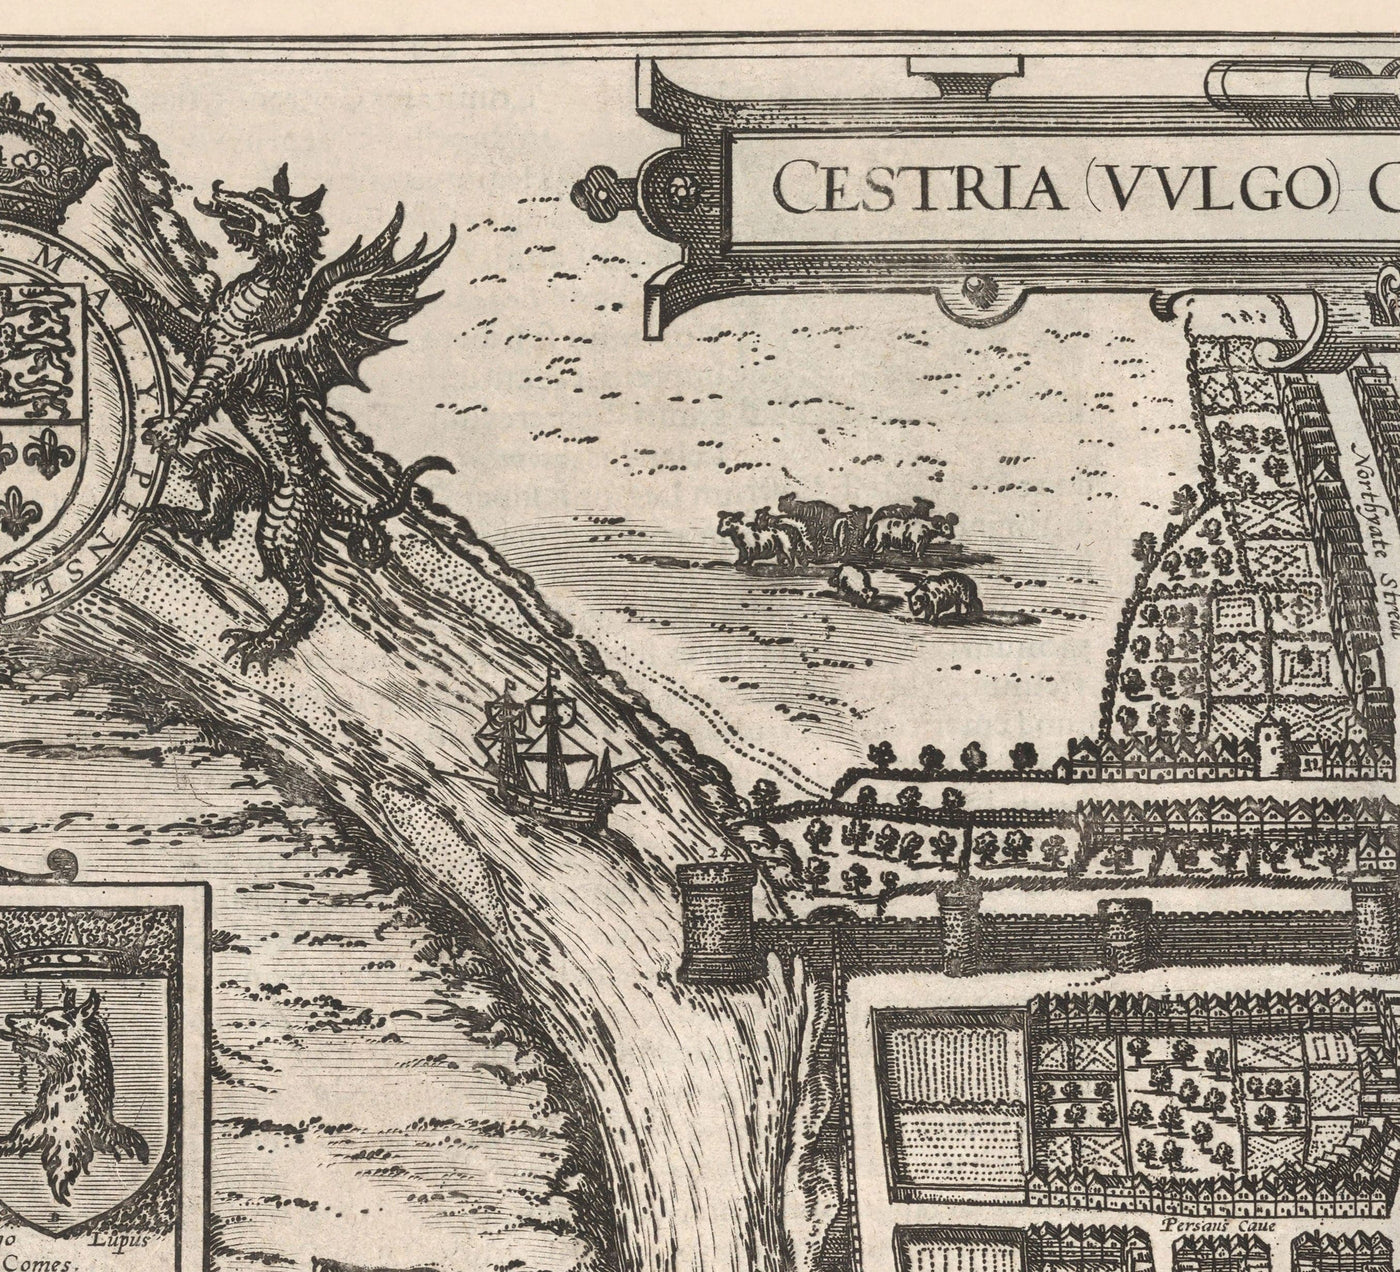 Old Map of Chester, Cheshire 1581 by Georg Braun - Castle, Cathedral, Roman City Walls